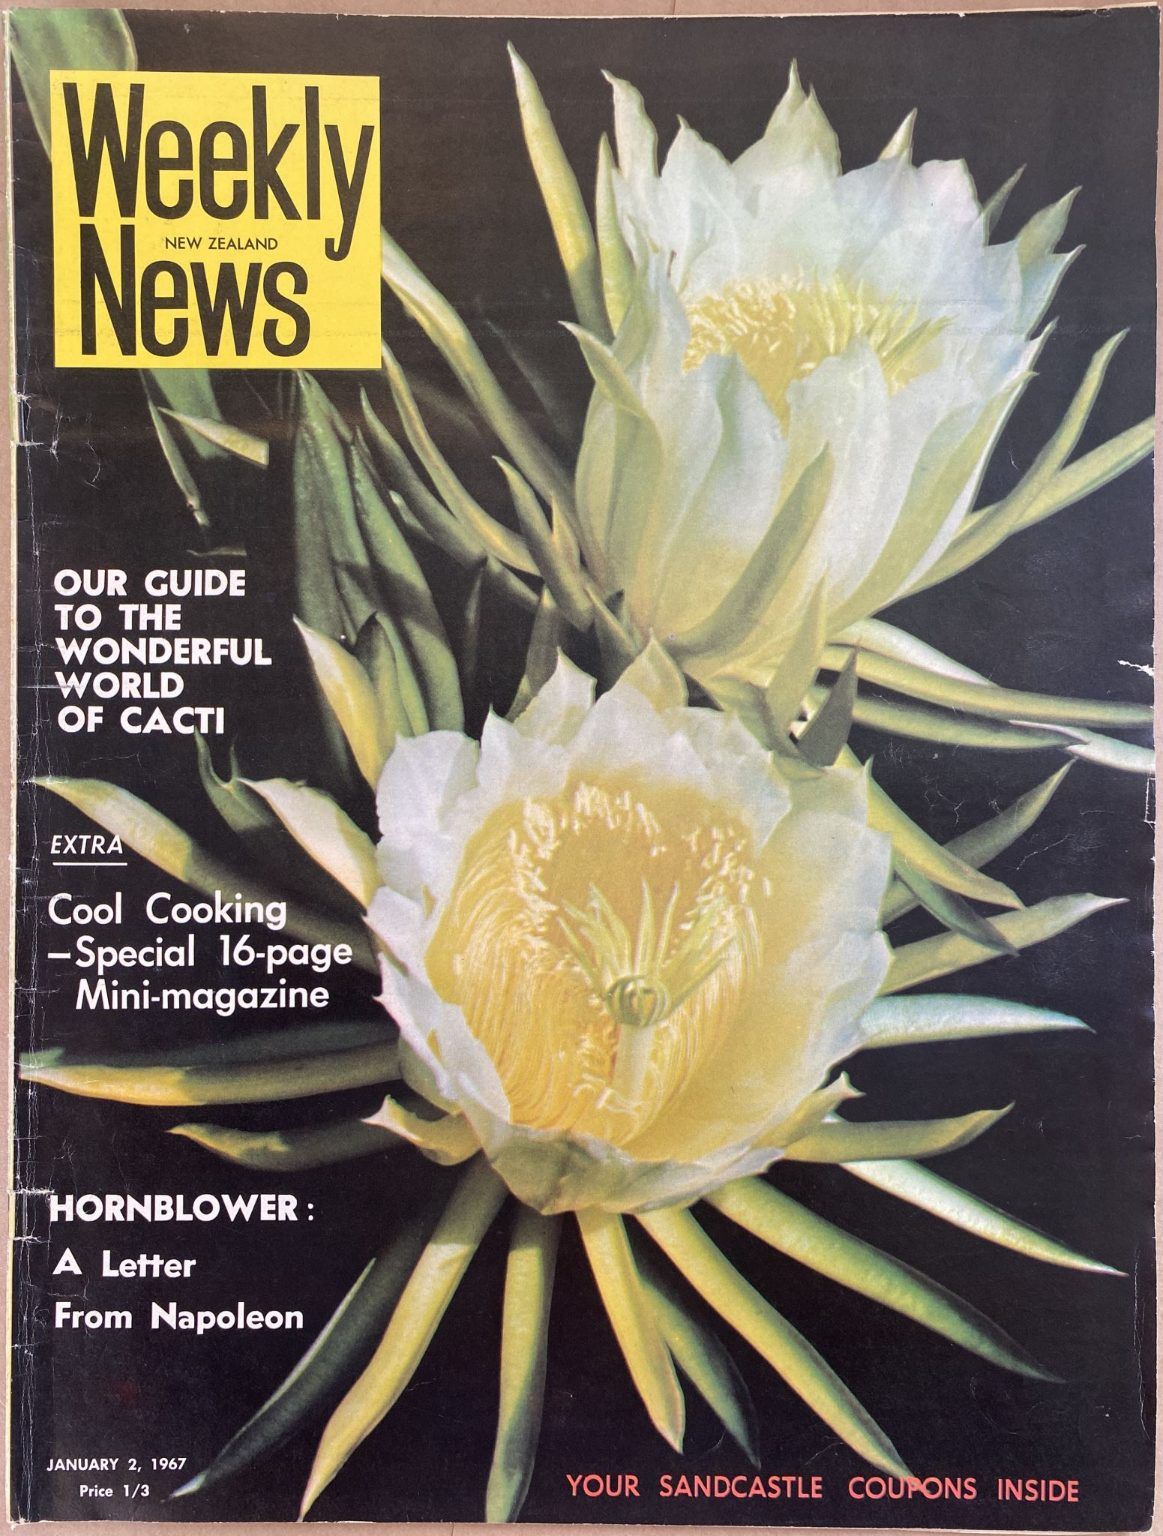 OLD NEWSPAPER: New Zealand Weekly News, No. 5380, 2 January 1967